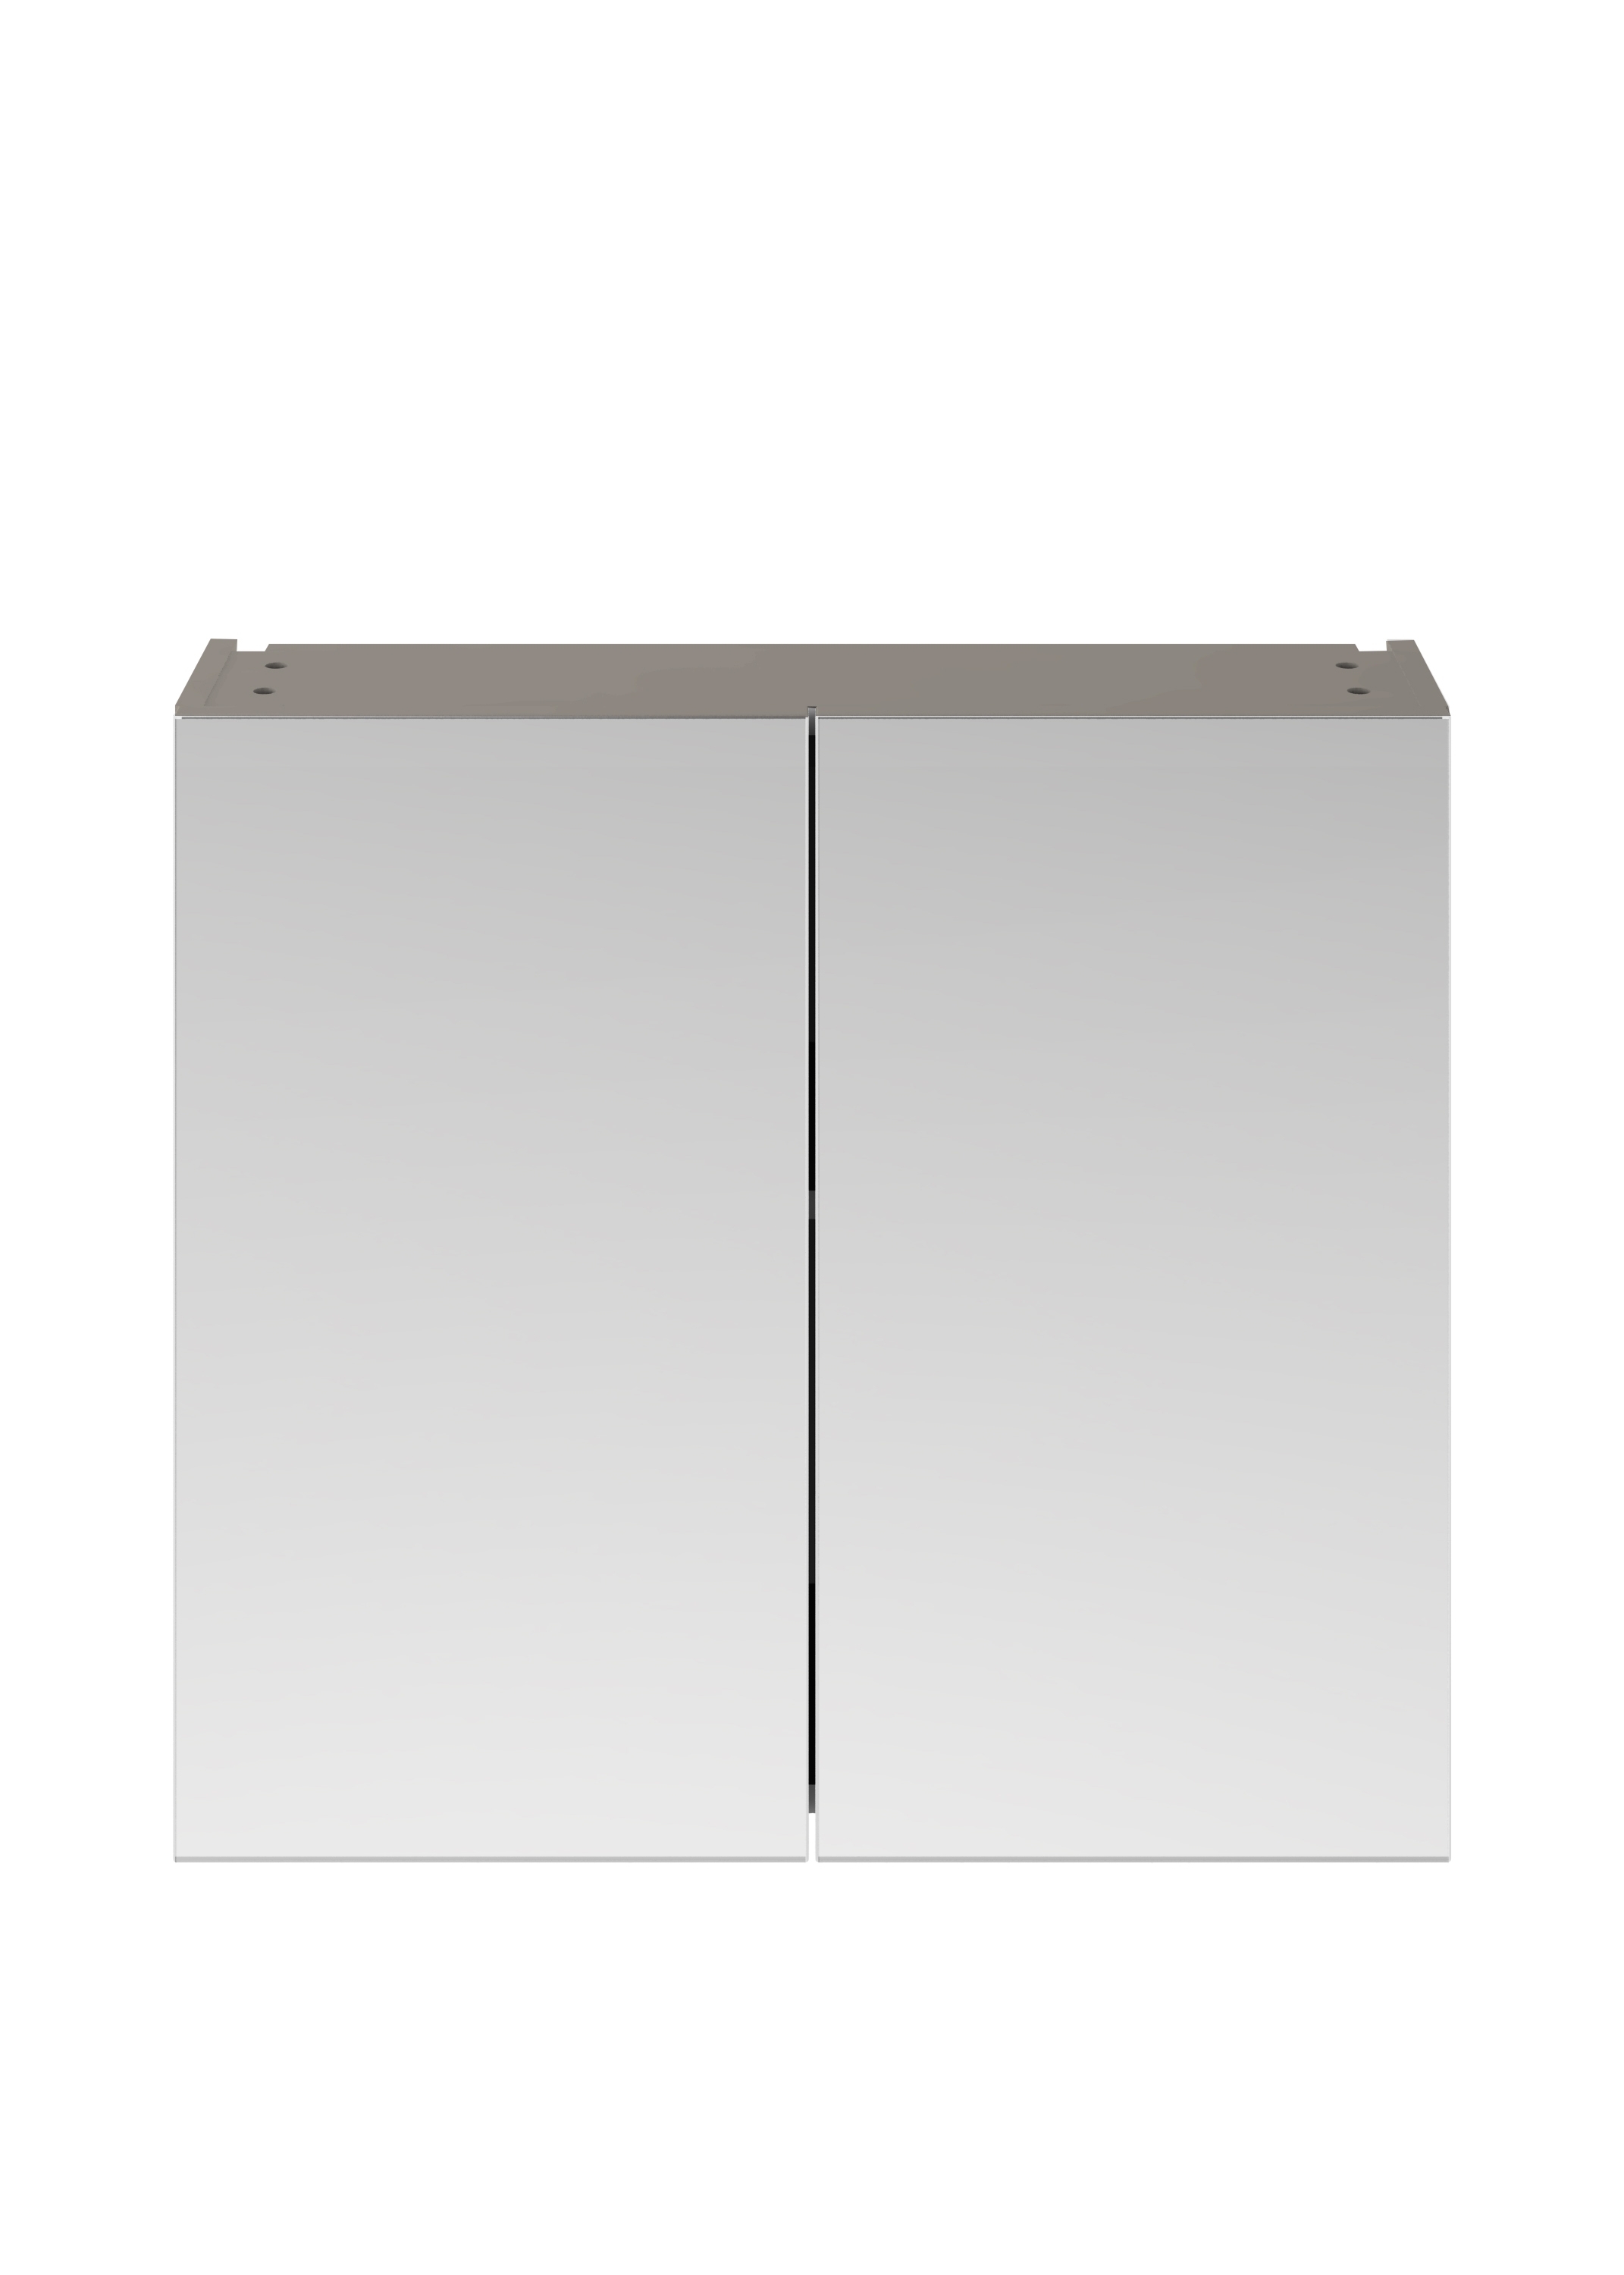 Nuie Athena (50/50) Mirrored Cabinet 800mm Wide - Stone Grey- MOC519 